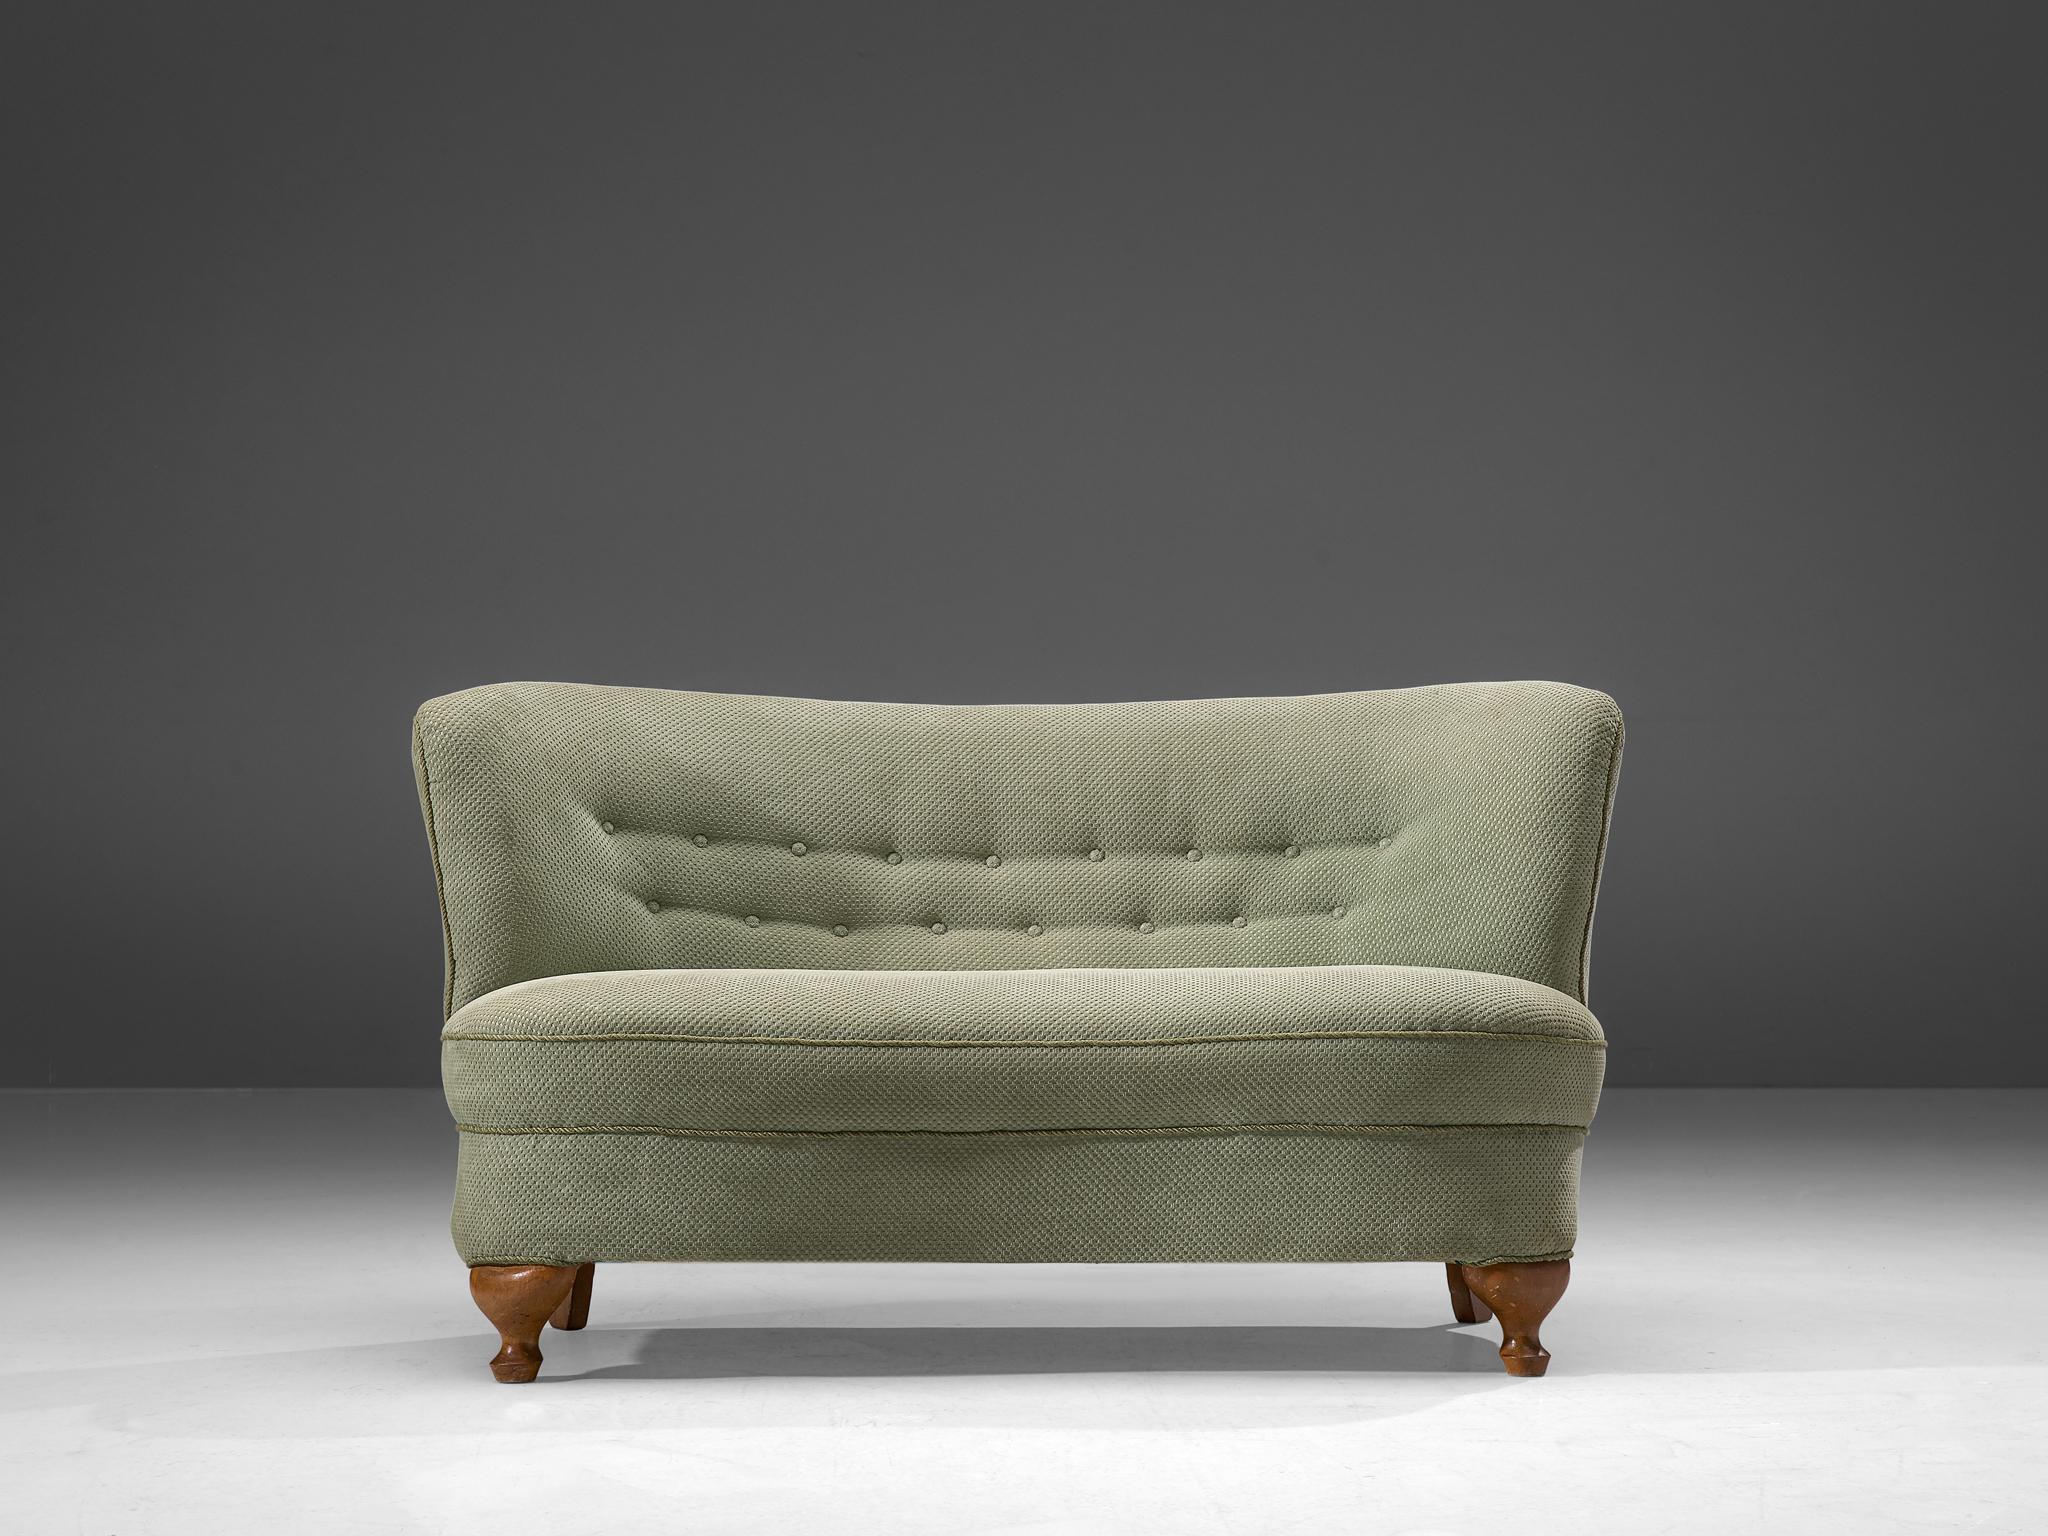 Settee, fabric and wood, France, 1950s

This elegant sofa is bold and round. The backrest flows slightly outwards when seen from the seat which is the reason that this chair has a very dynamic look. This voluptuous settee bears resemblances to the